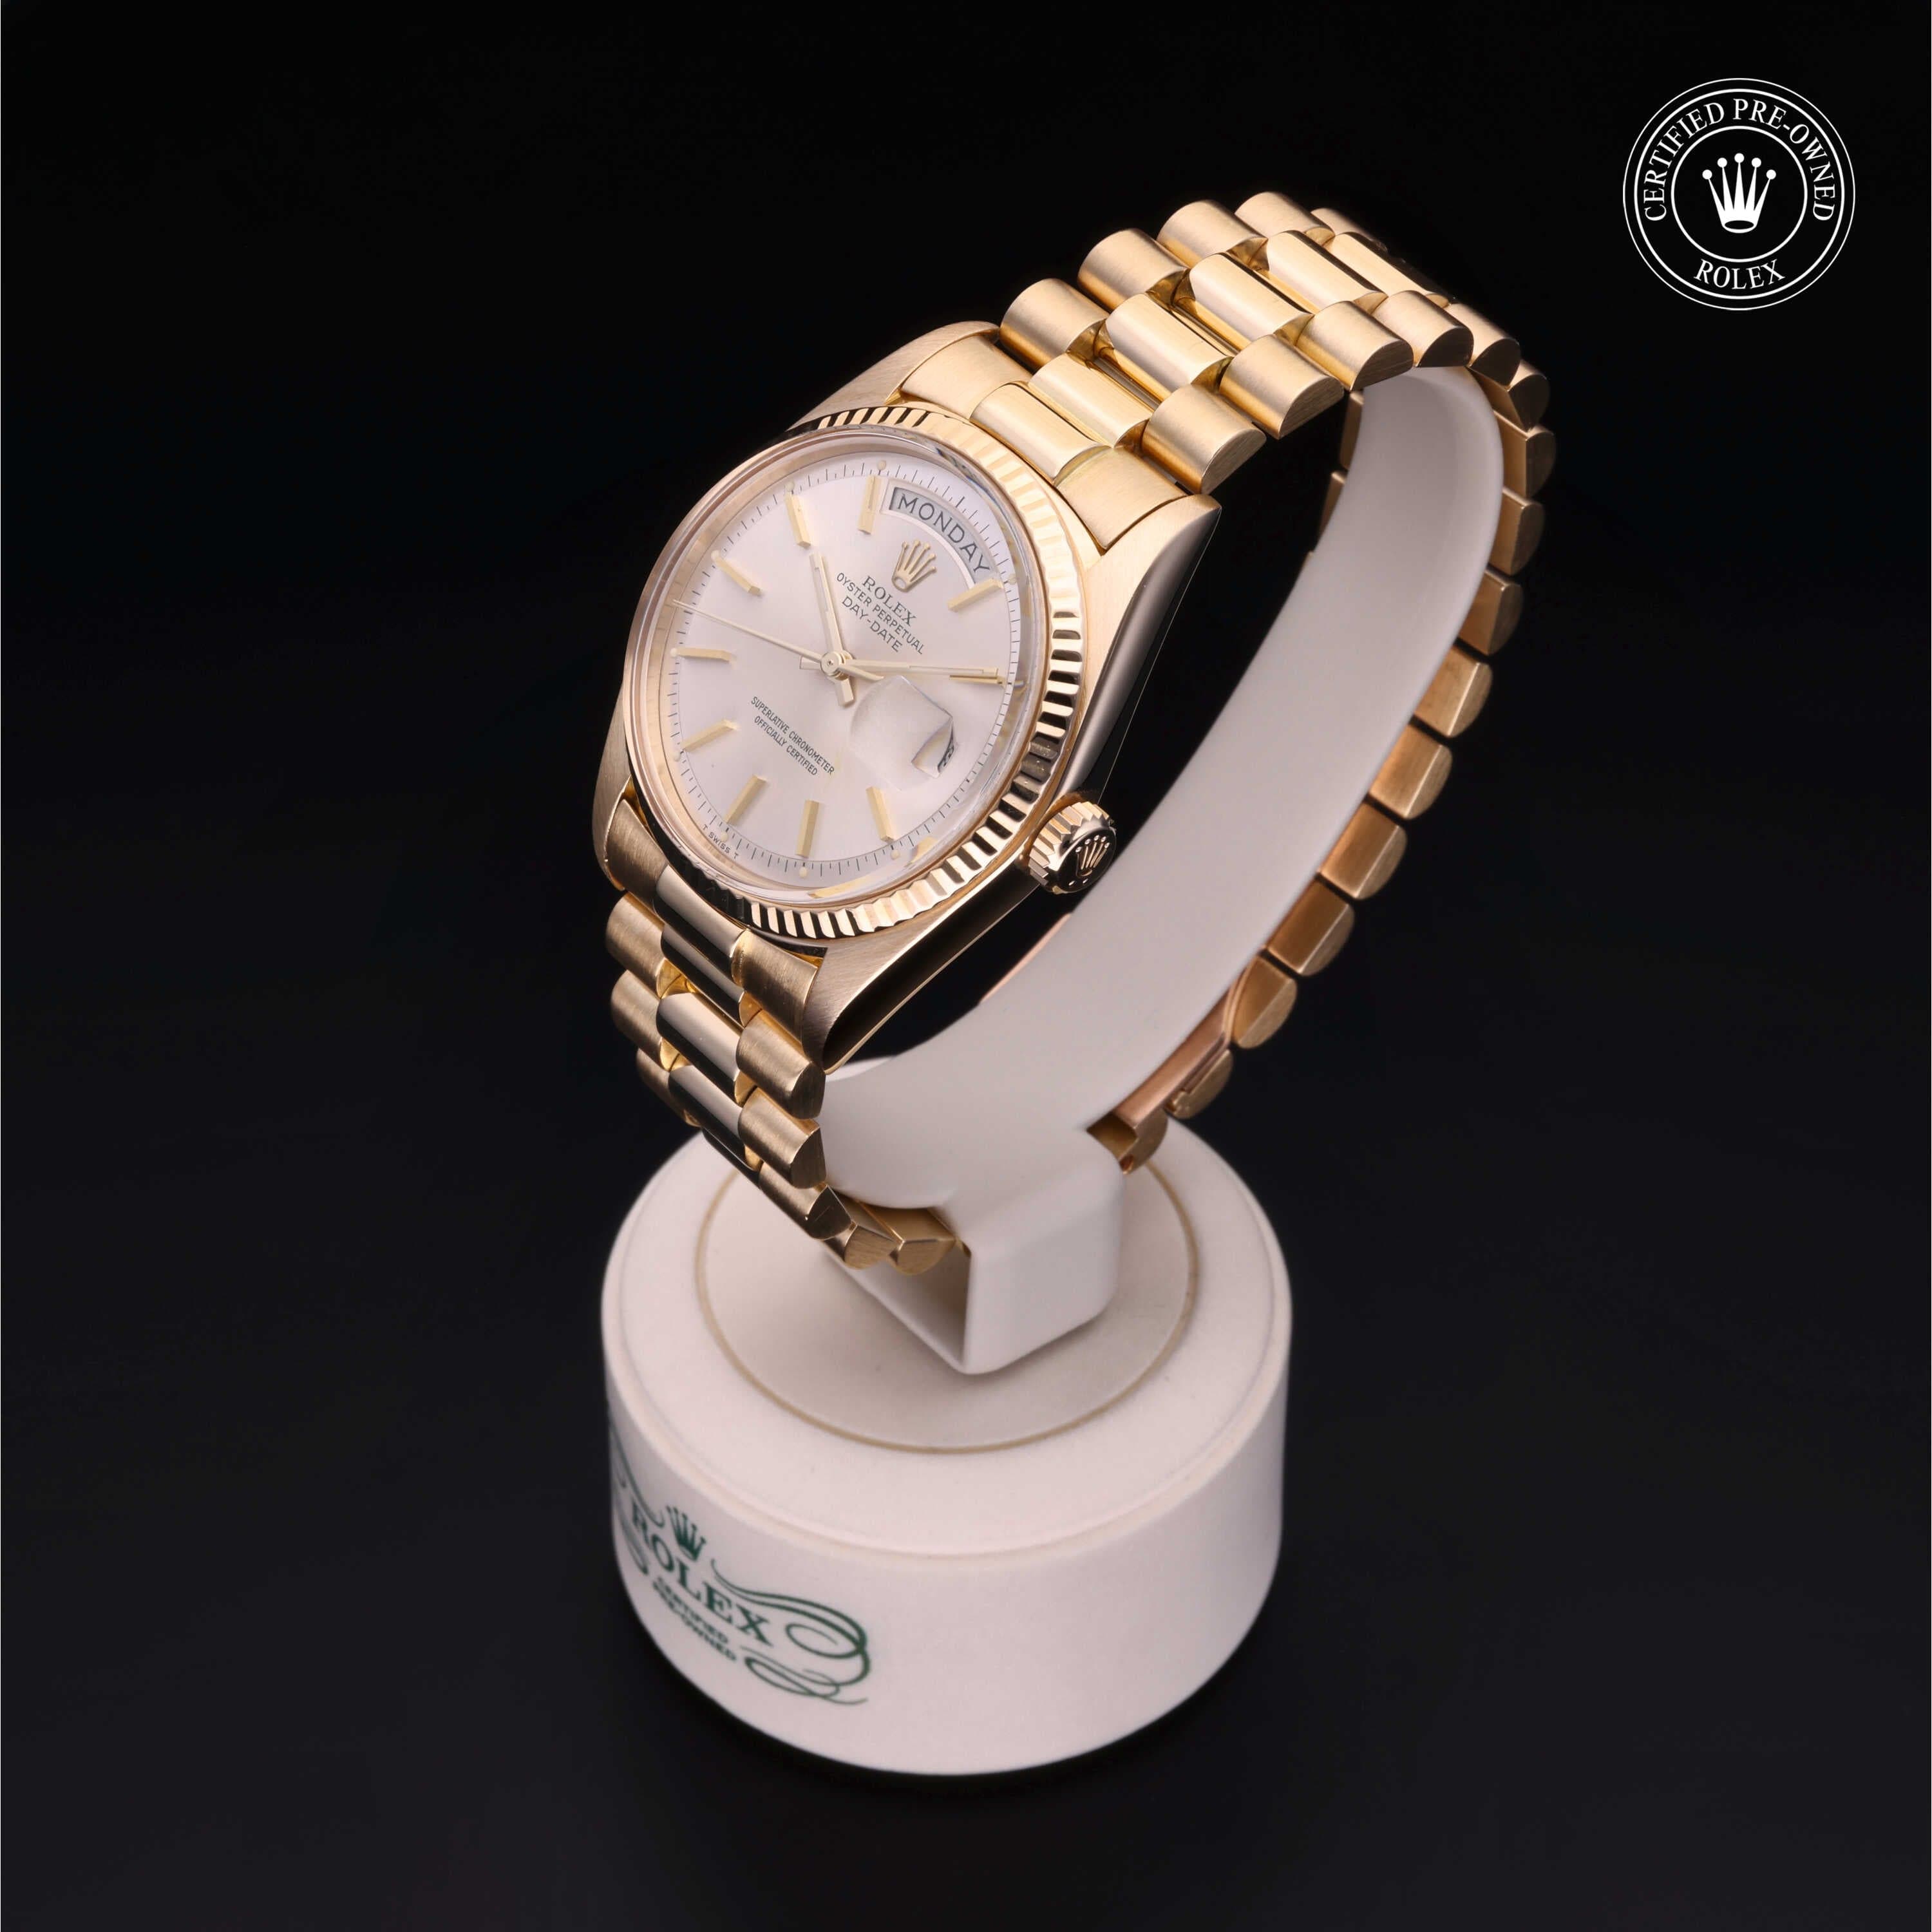 Rolex Certified Pre-Owned Day-Date